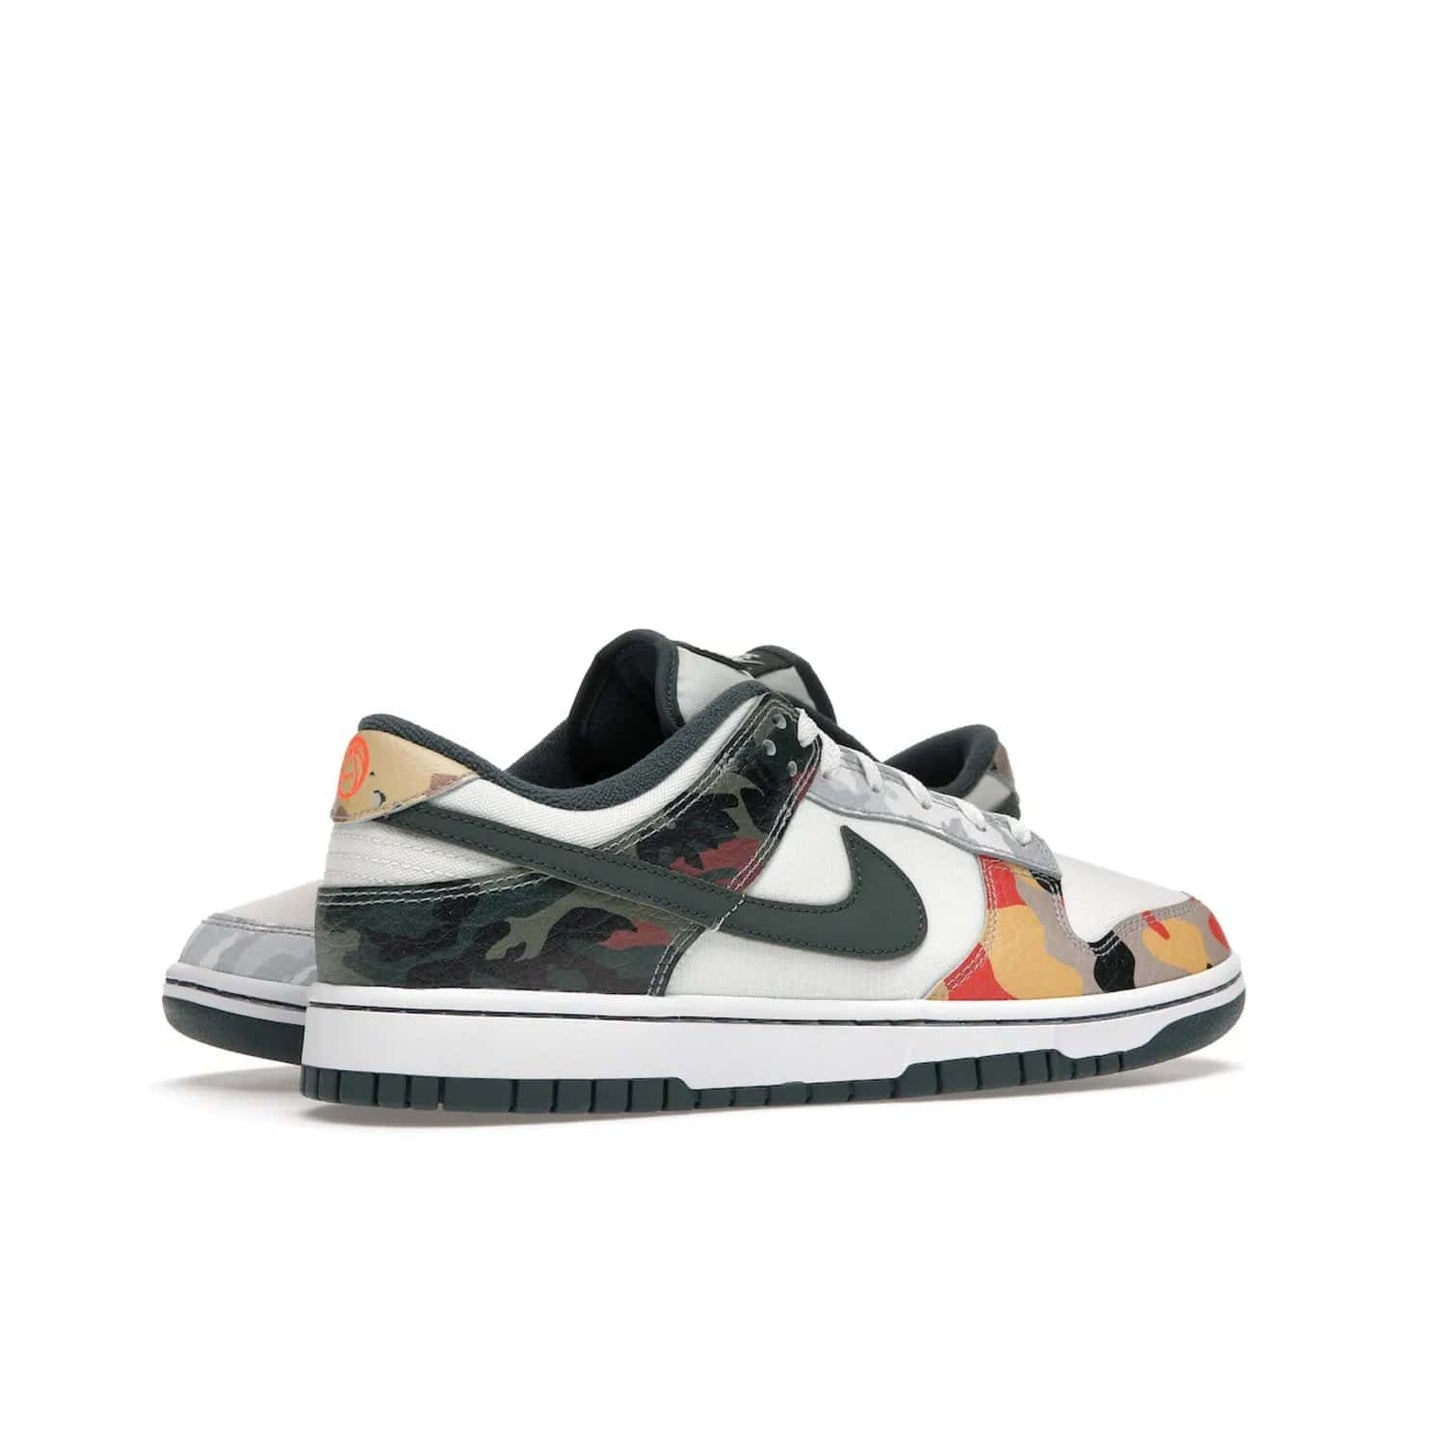 Nike Dunk Low SE Sail Multi-Camo - Image 34 - Only at www.BallersClubKickz.com - Classic design meets statement style in the Nike Dunk Low SE Sail Multi-Camo. White leather base with multi-color camo overlays, vibrant Nike Swooshes, and orange Nike embroidery. Get yours August 2021.